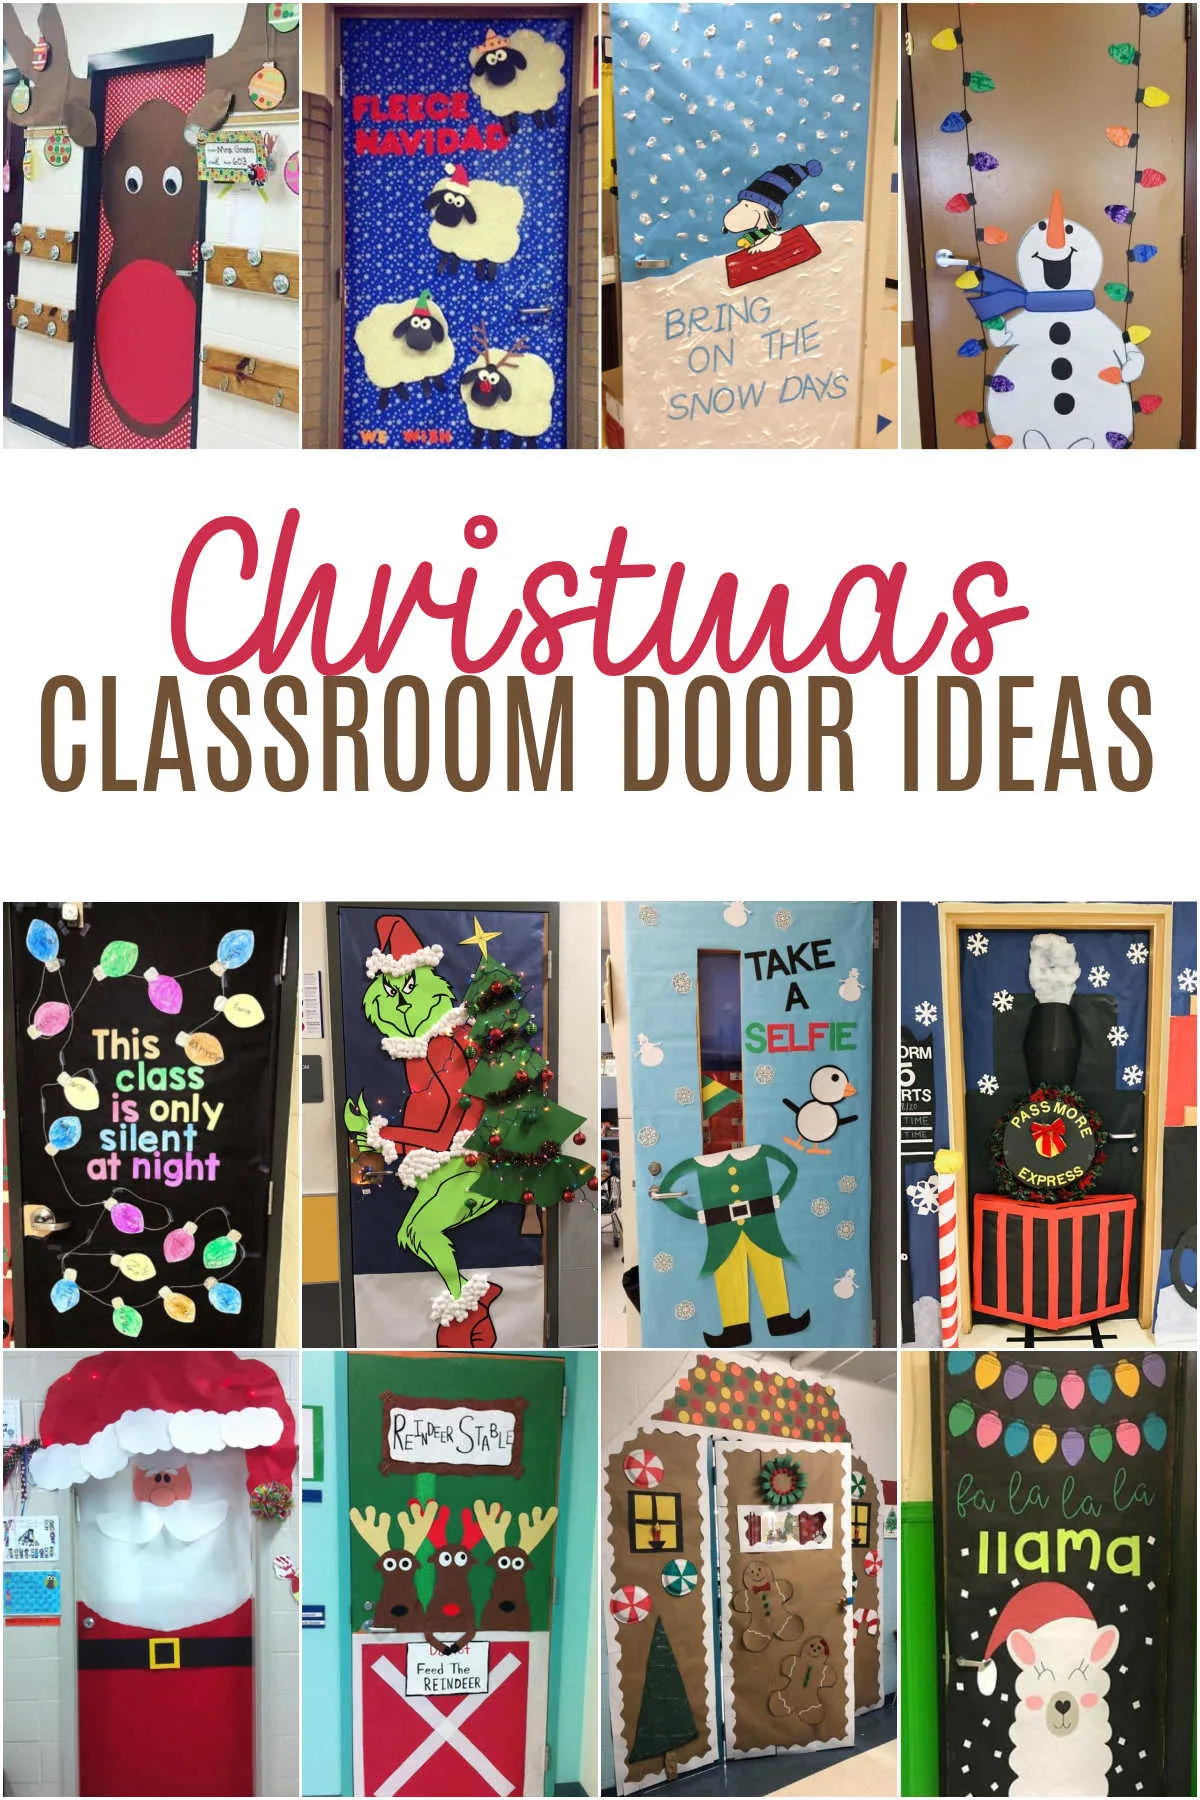 Collage of Christmas Door Ideas for the Classroom